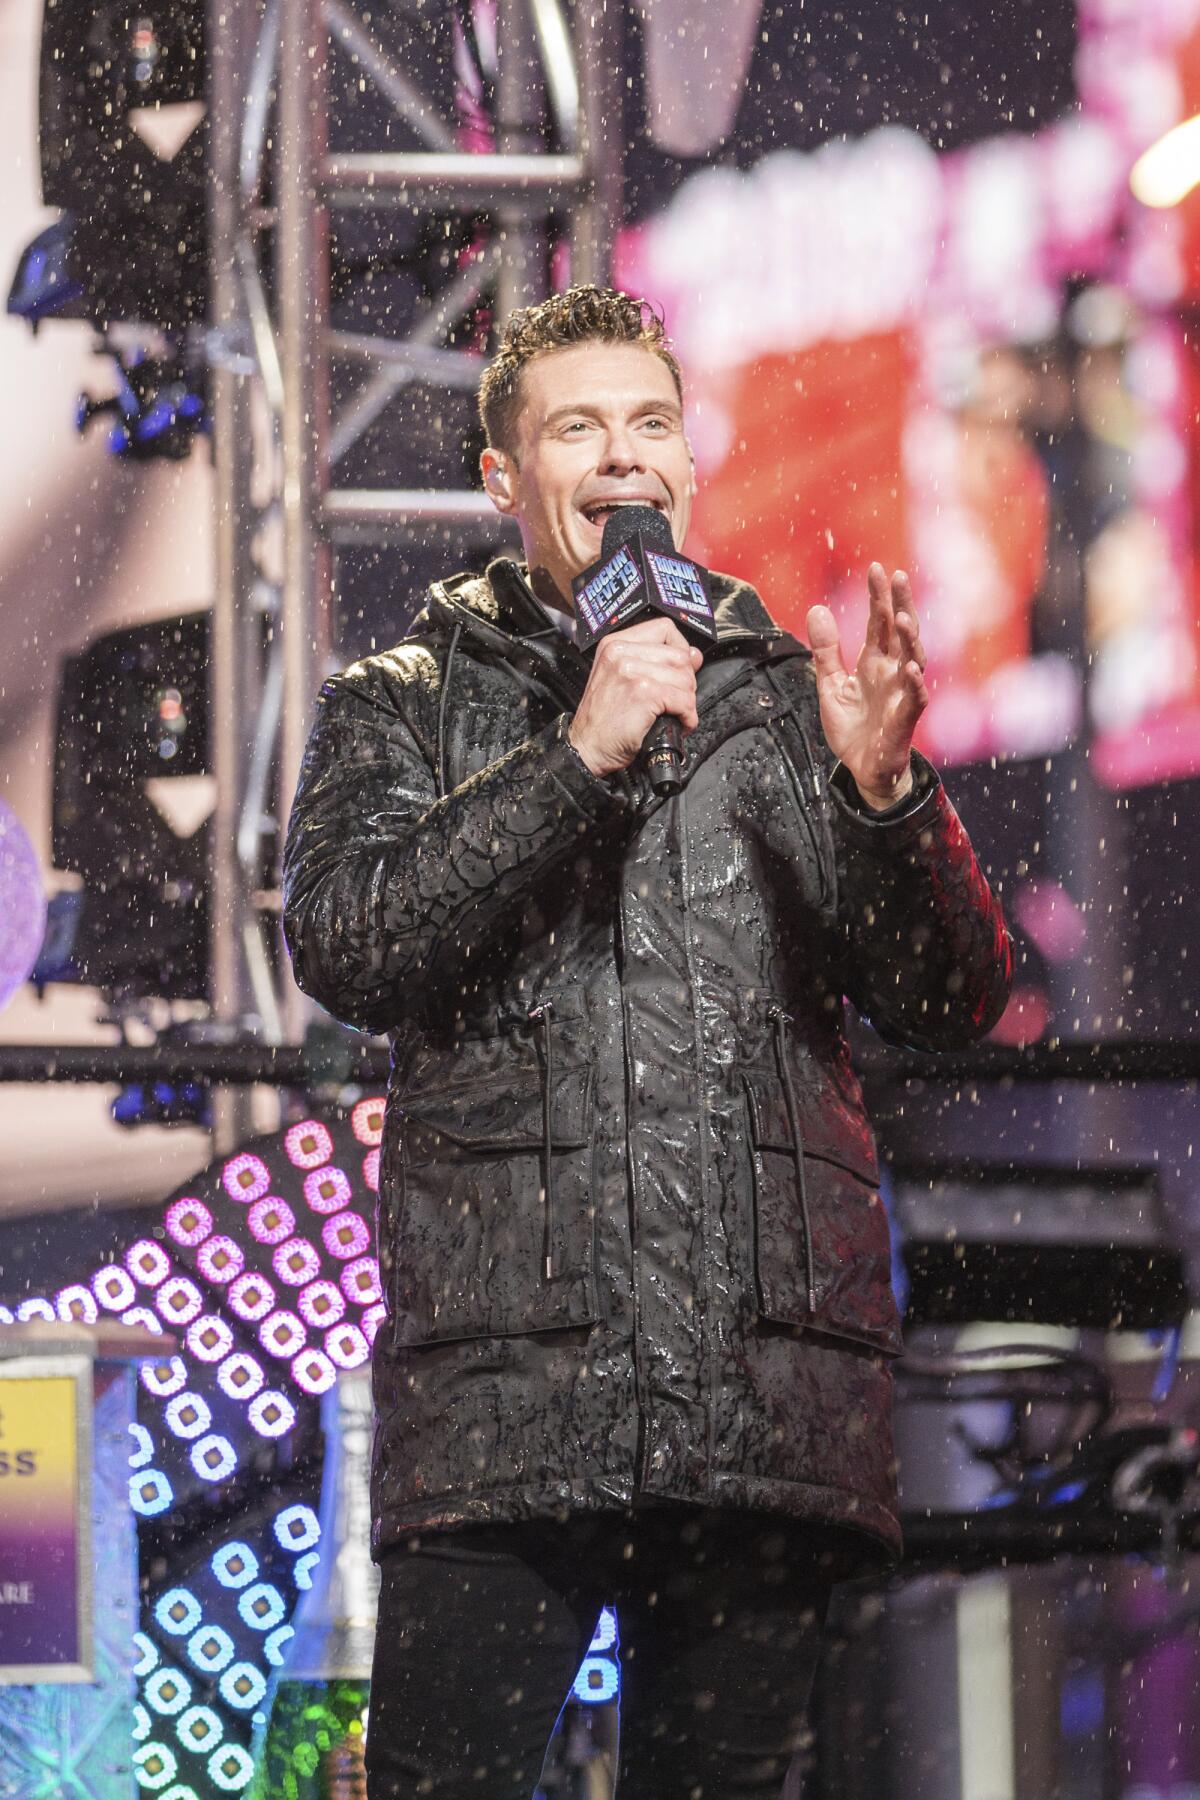 Ryan Seacrest in a black puffer jacket speaks into a microphone in the snow